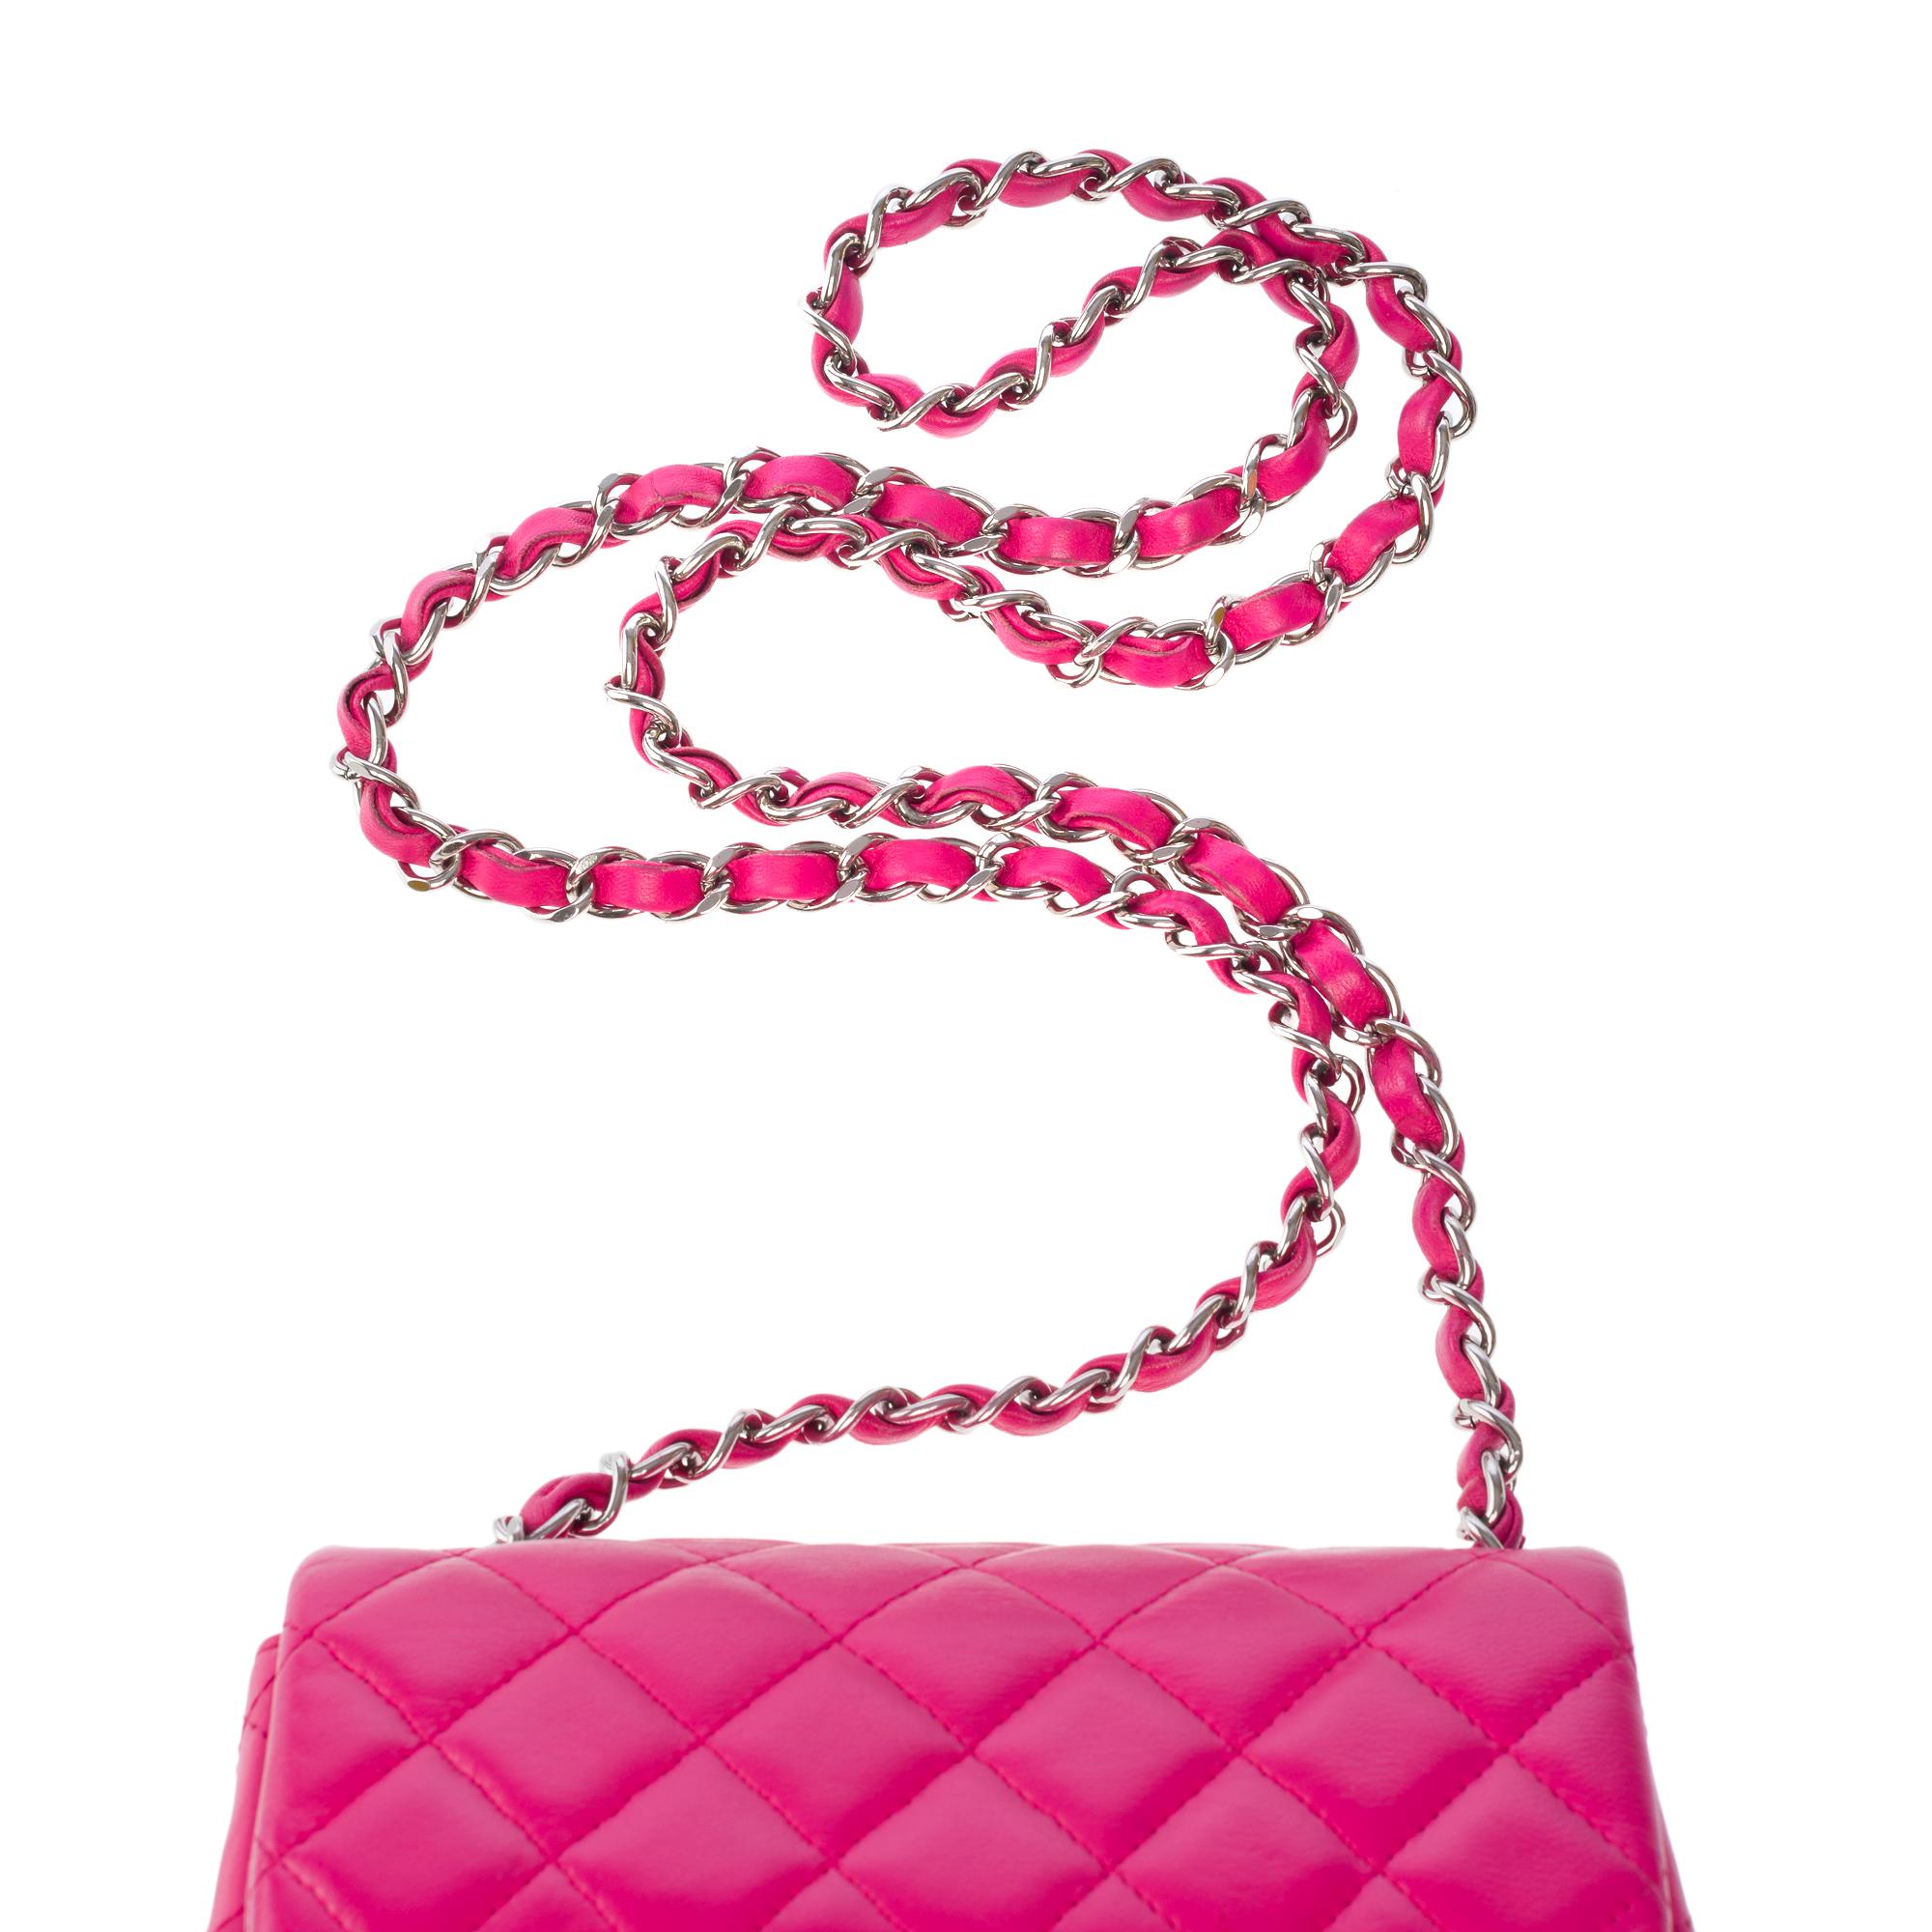 Gorgeous Chanel Mini Timeless Shoulder flap bag in Pink quilted leather, SHW For Sale 5